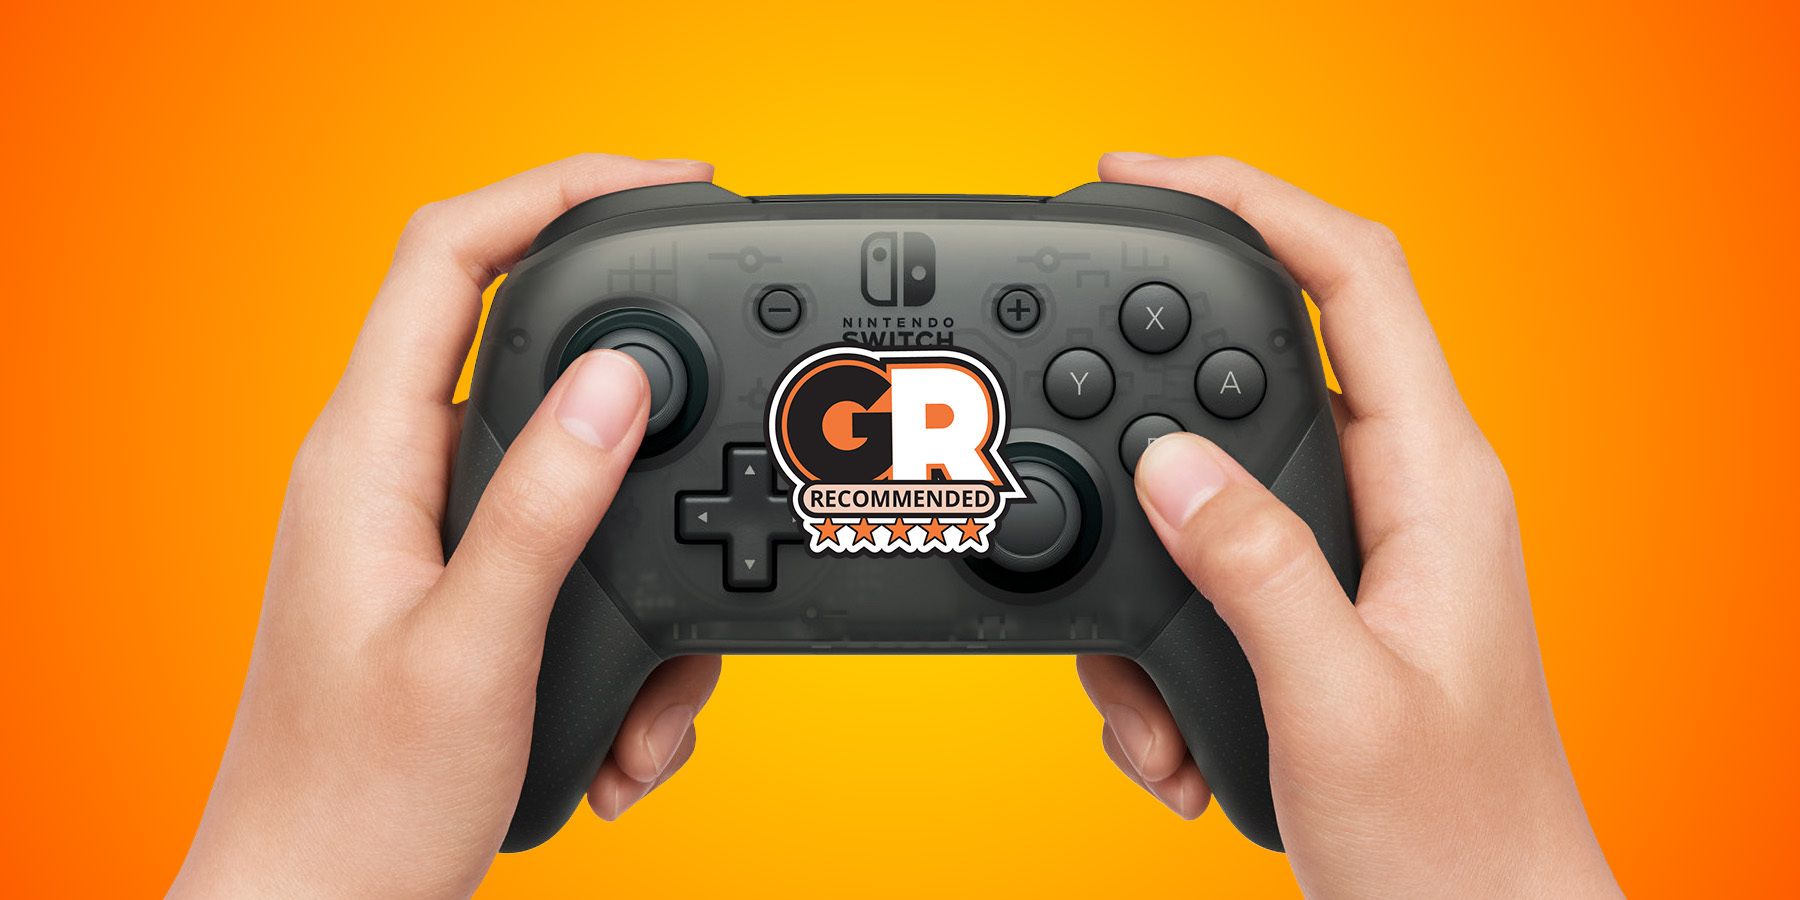 You can now use your Switch's retro controllers to play Steam games